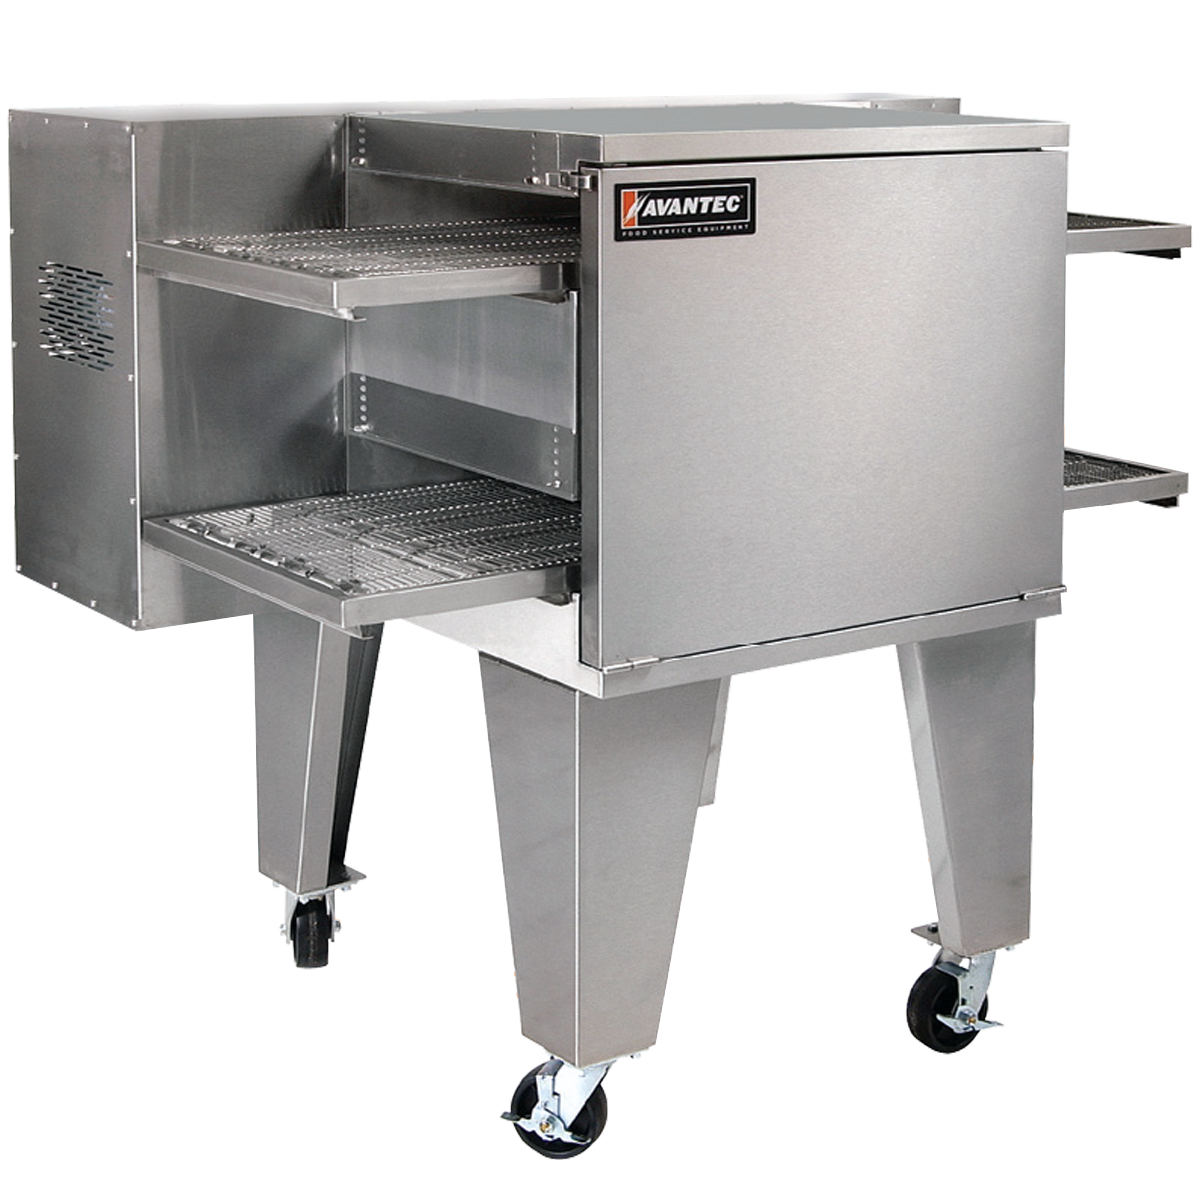 Foodservice ovens